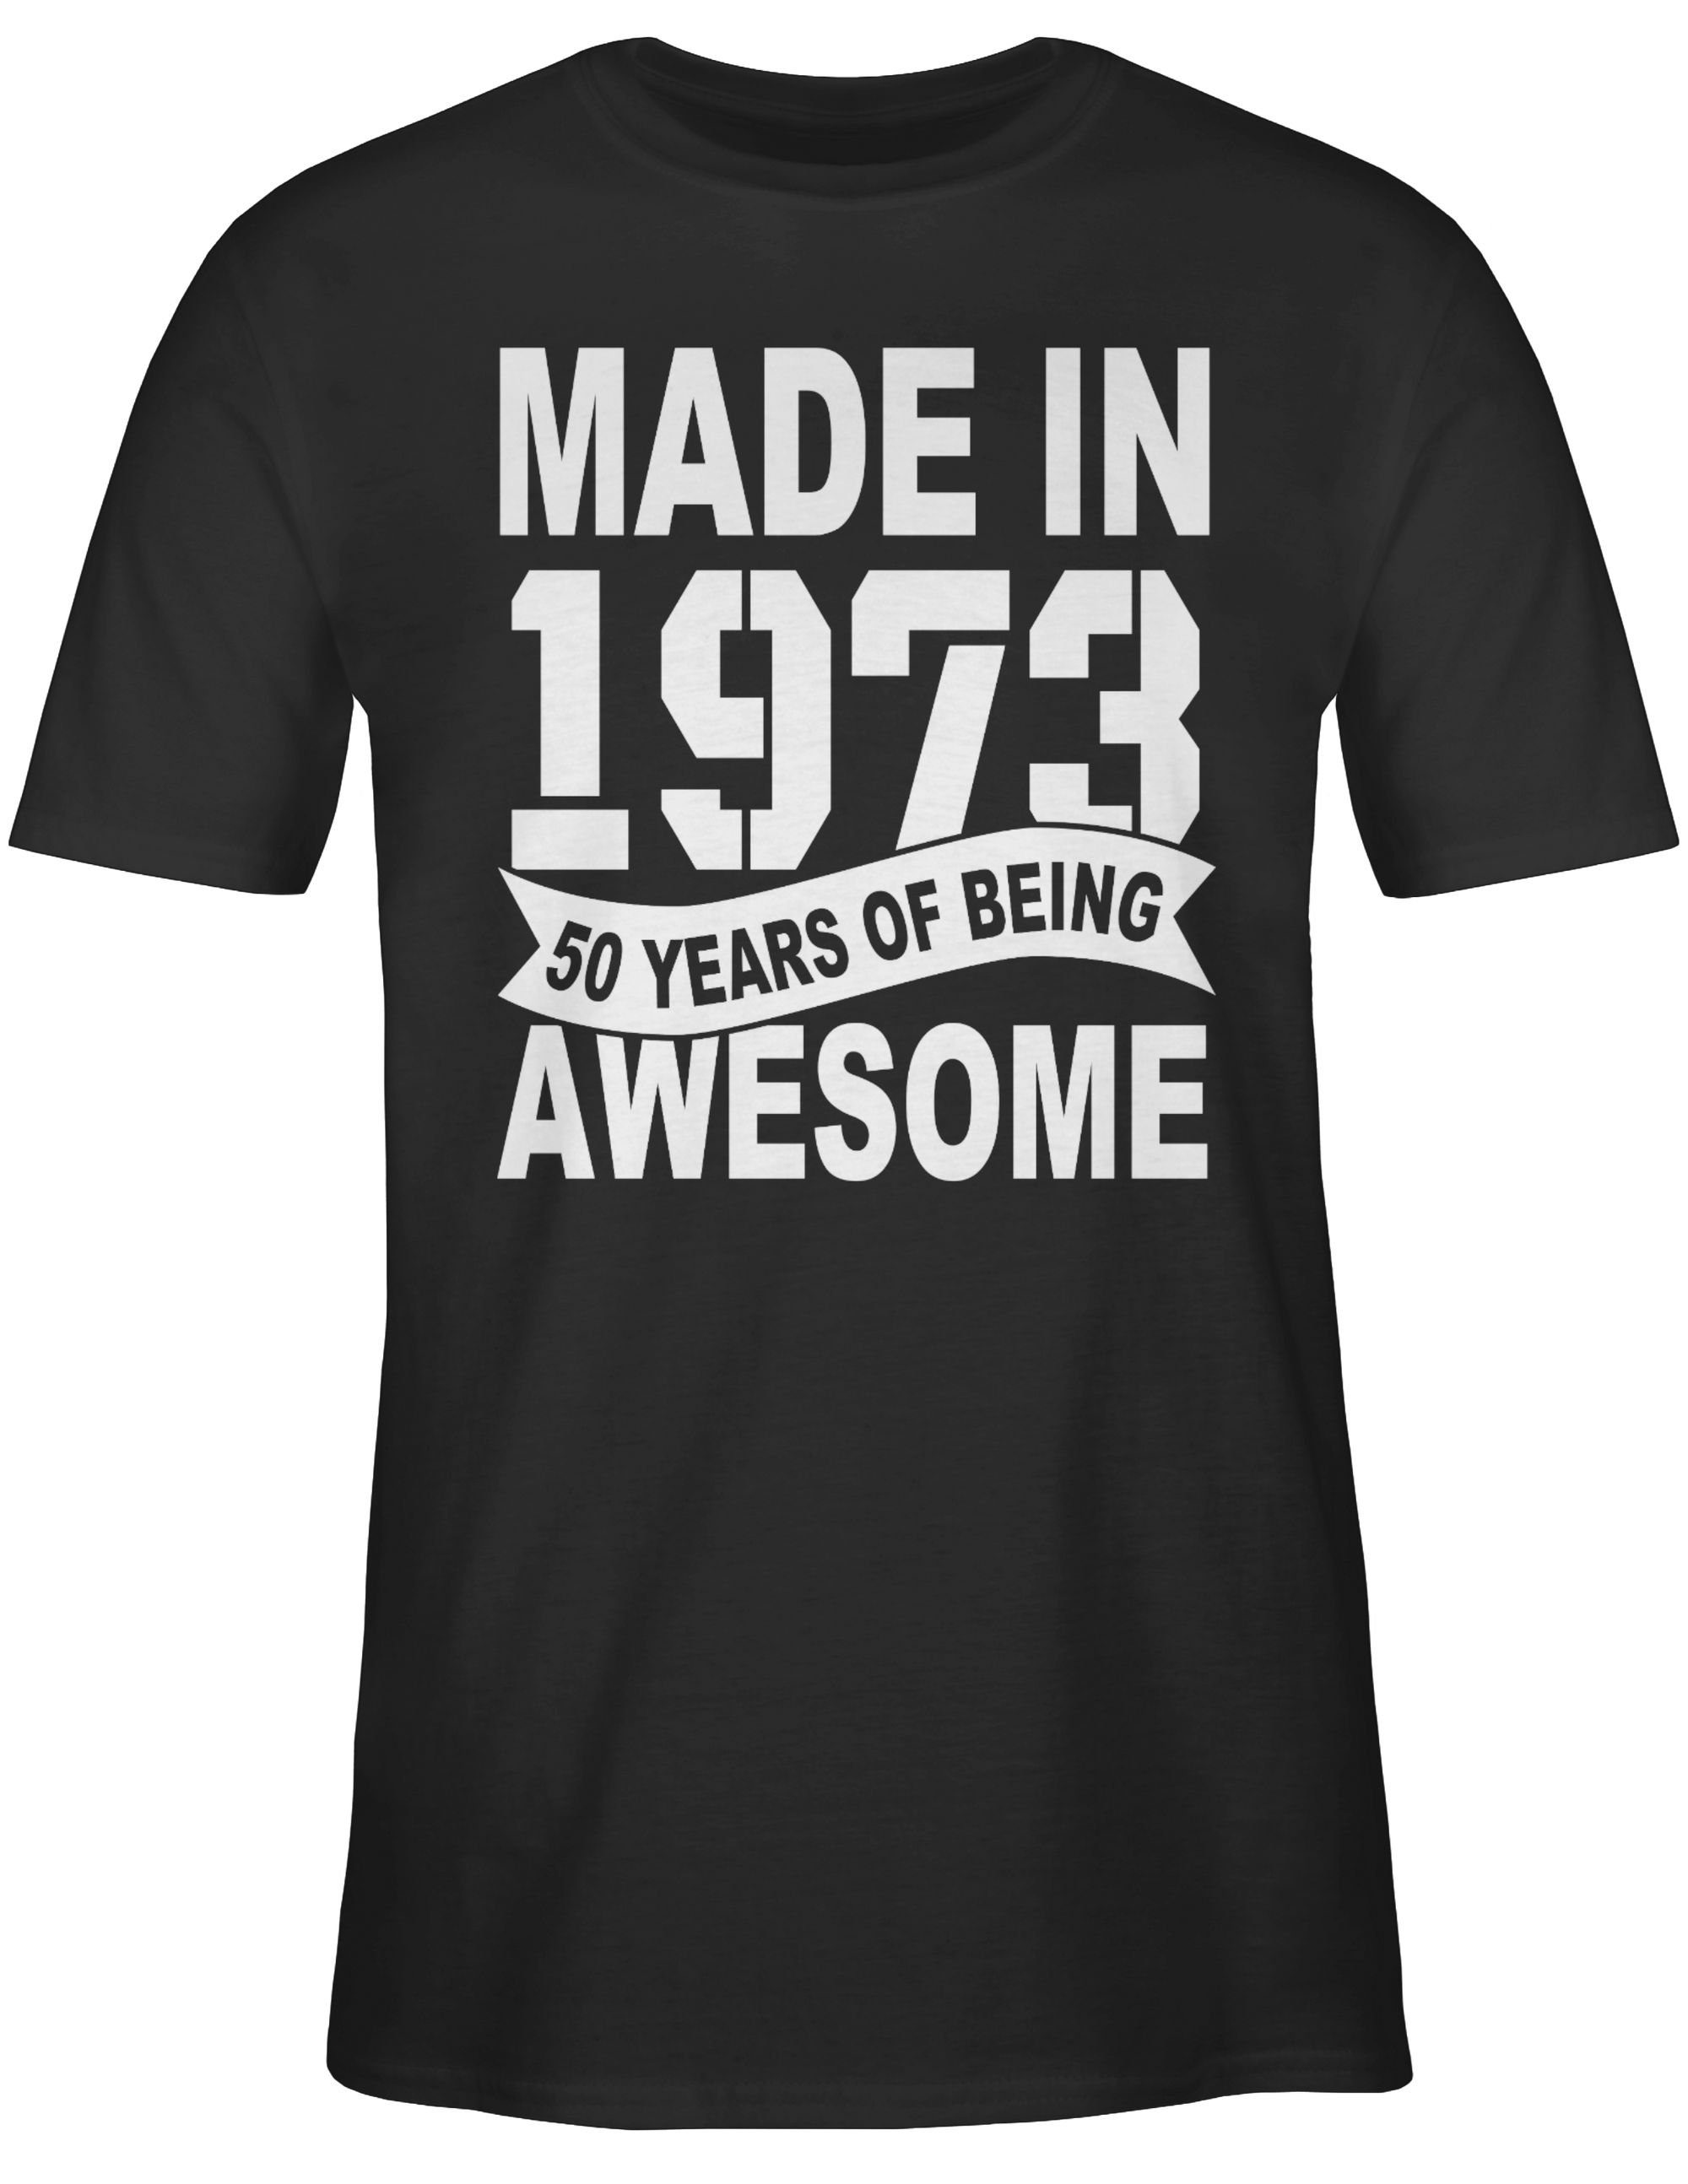 Schwarz Fifty 50. Geburtstag of awesome years T-Shirt 3 being Shirtracer weiß in Made 1973